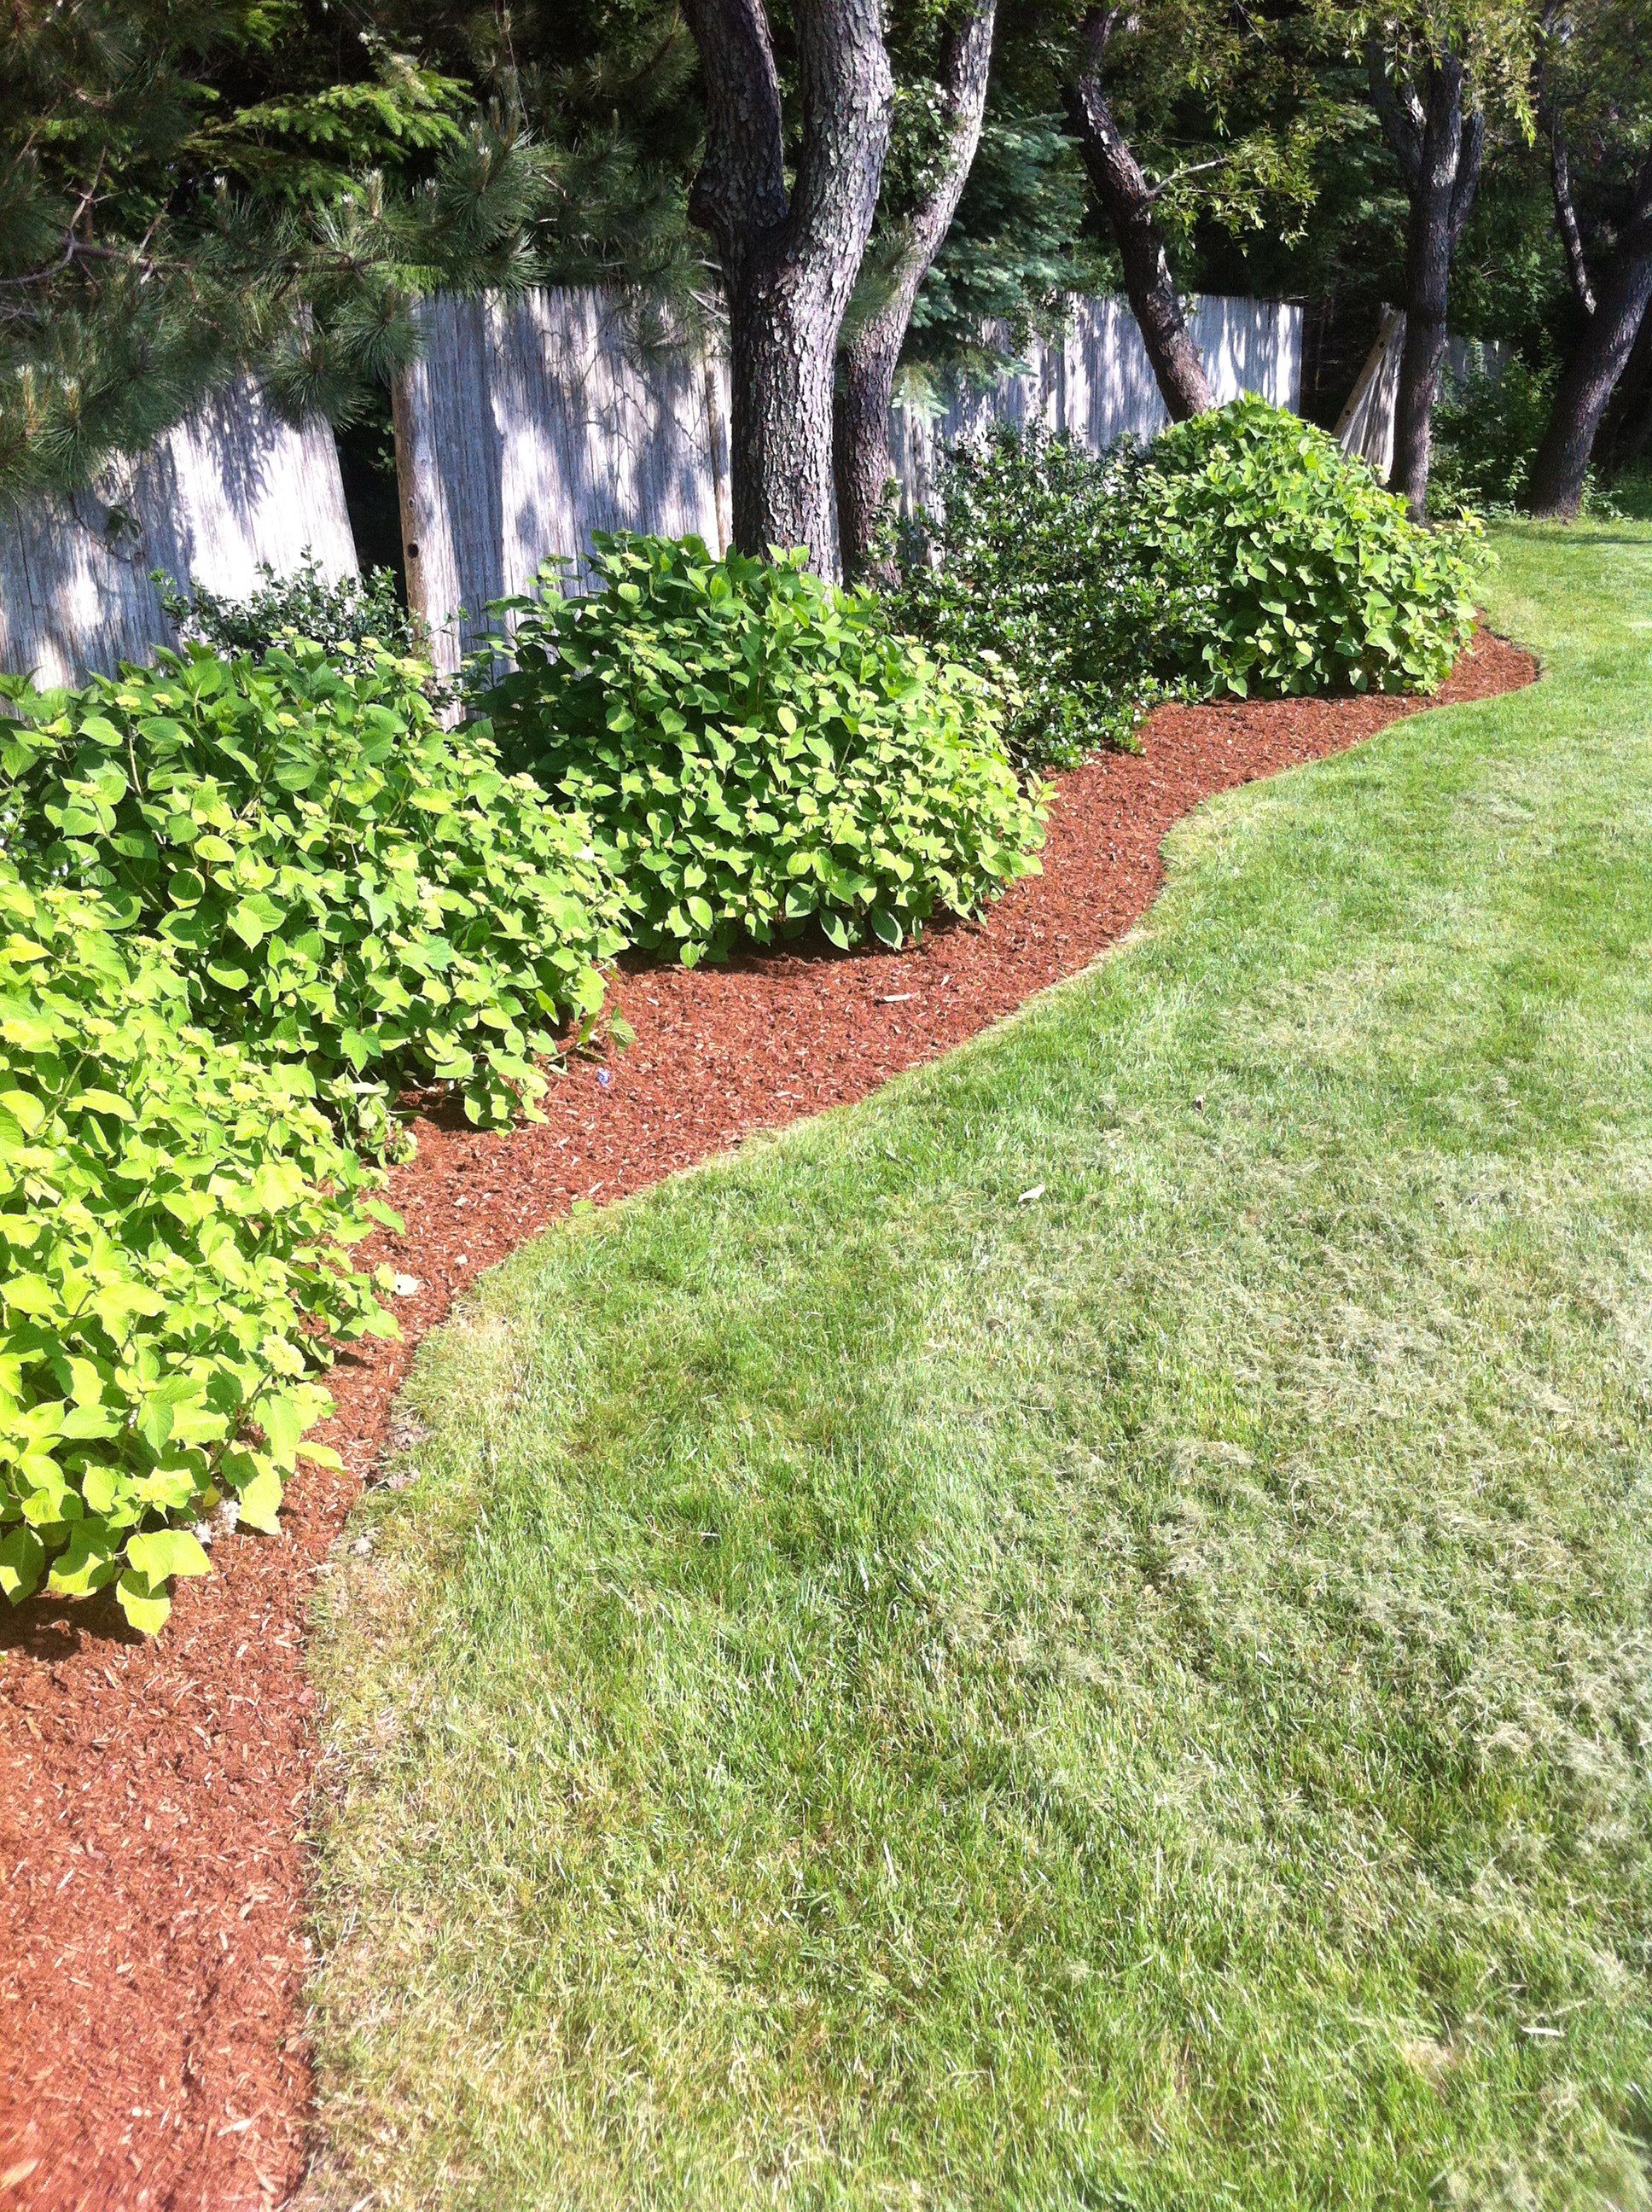  Landscaping Ideas For A Low Maintenance Yard - Low-maintenance Landscaping Ideas For Front Yard